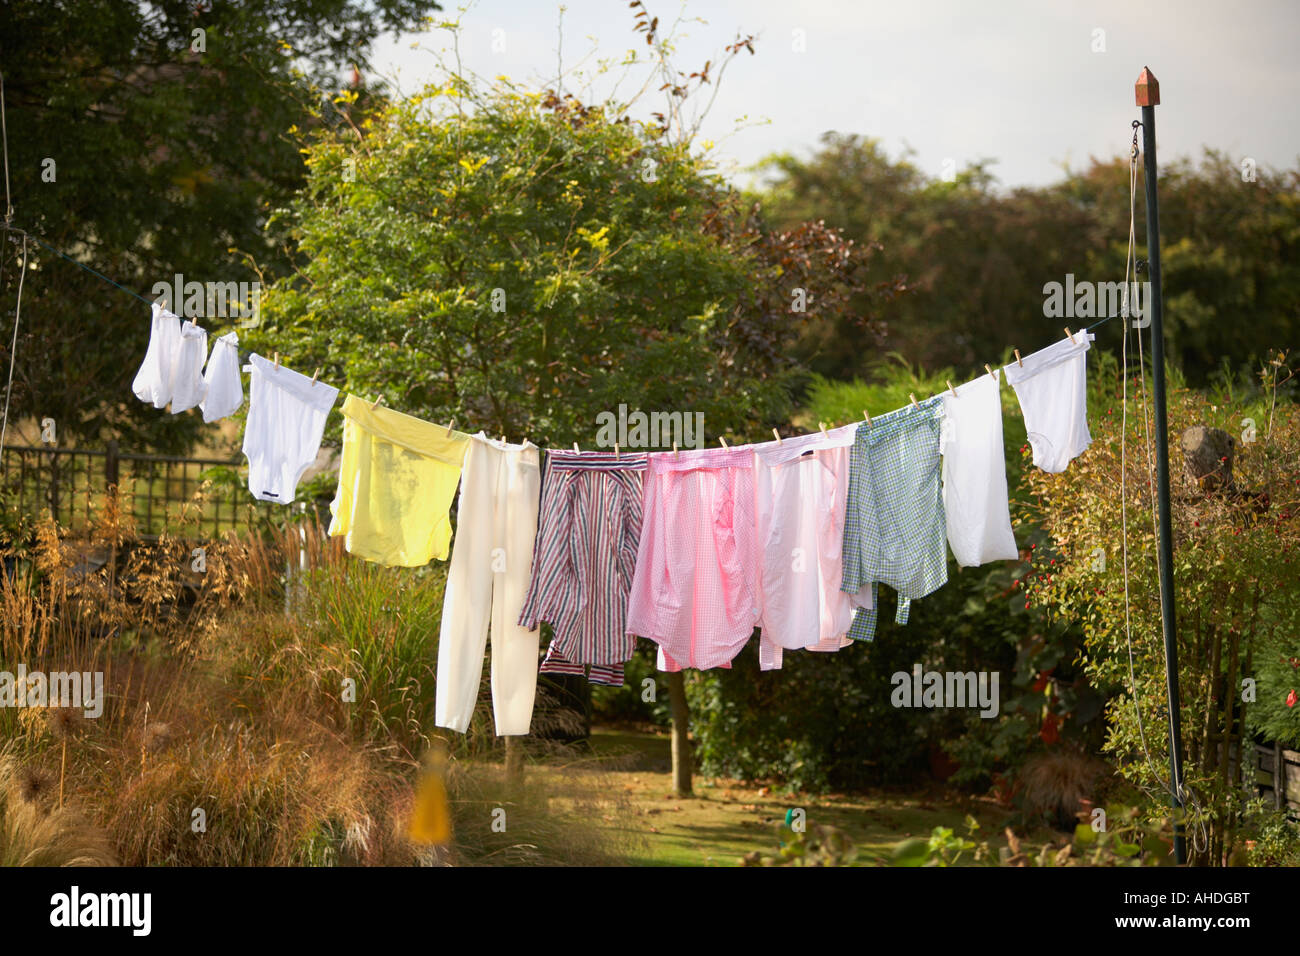 washing hanging on line outside in garden Stock Photo